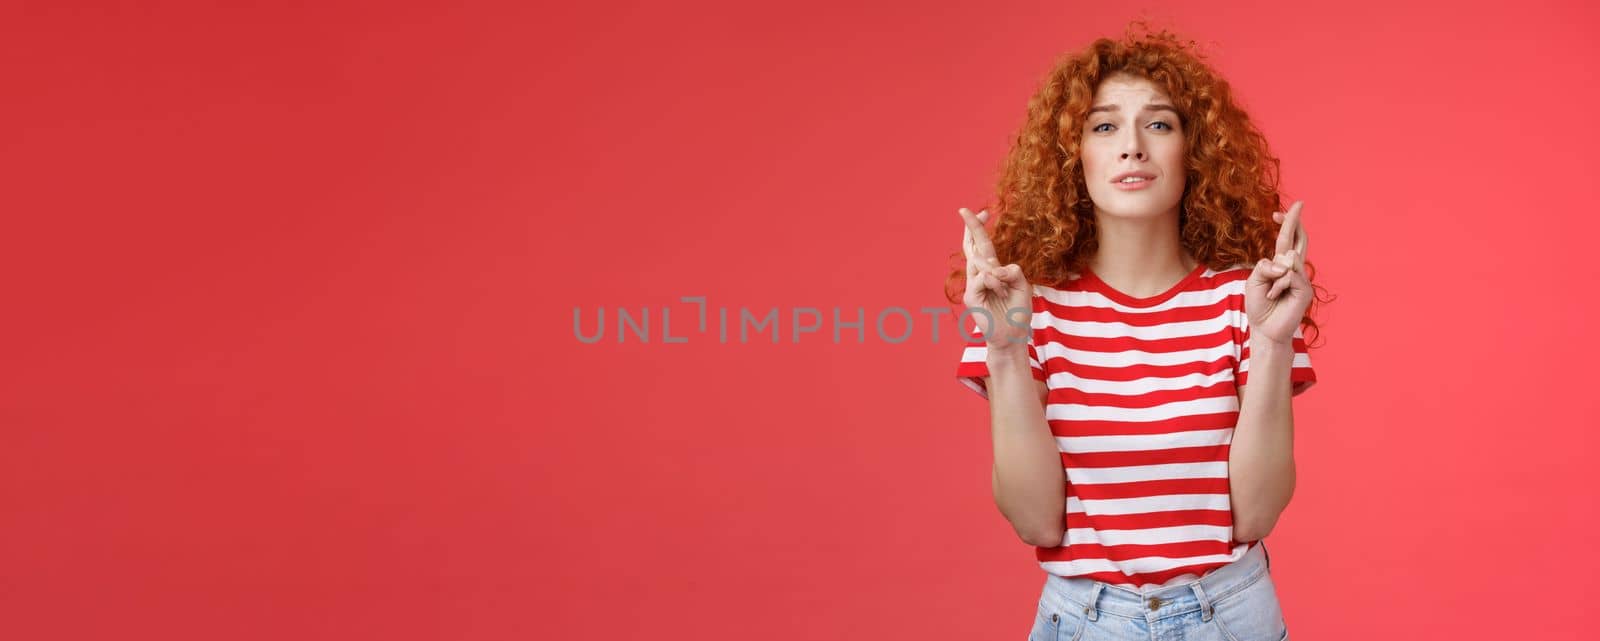 Lifestyle. Nervous young silly timid cute redhead ginger girl anticipating hopeful results believe praying squinting intense worry to win cross fingers good luck wish come true red background.